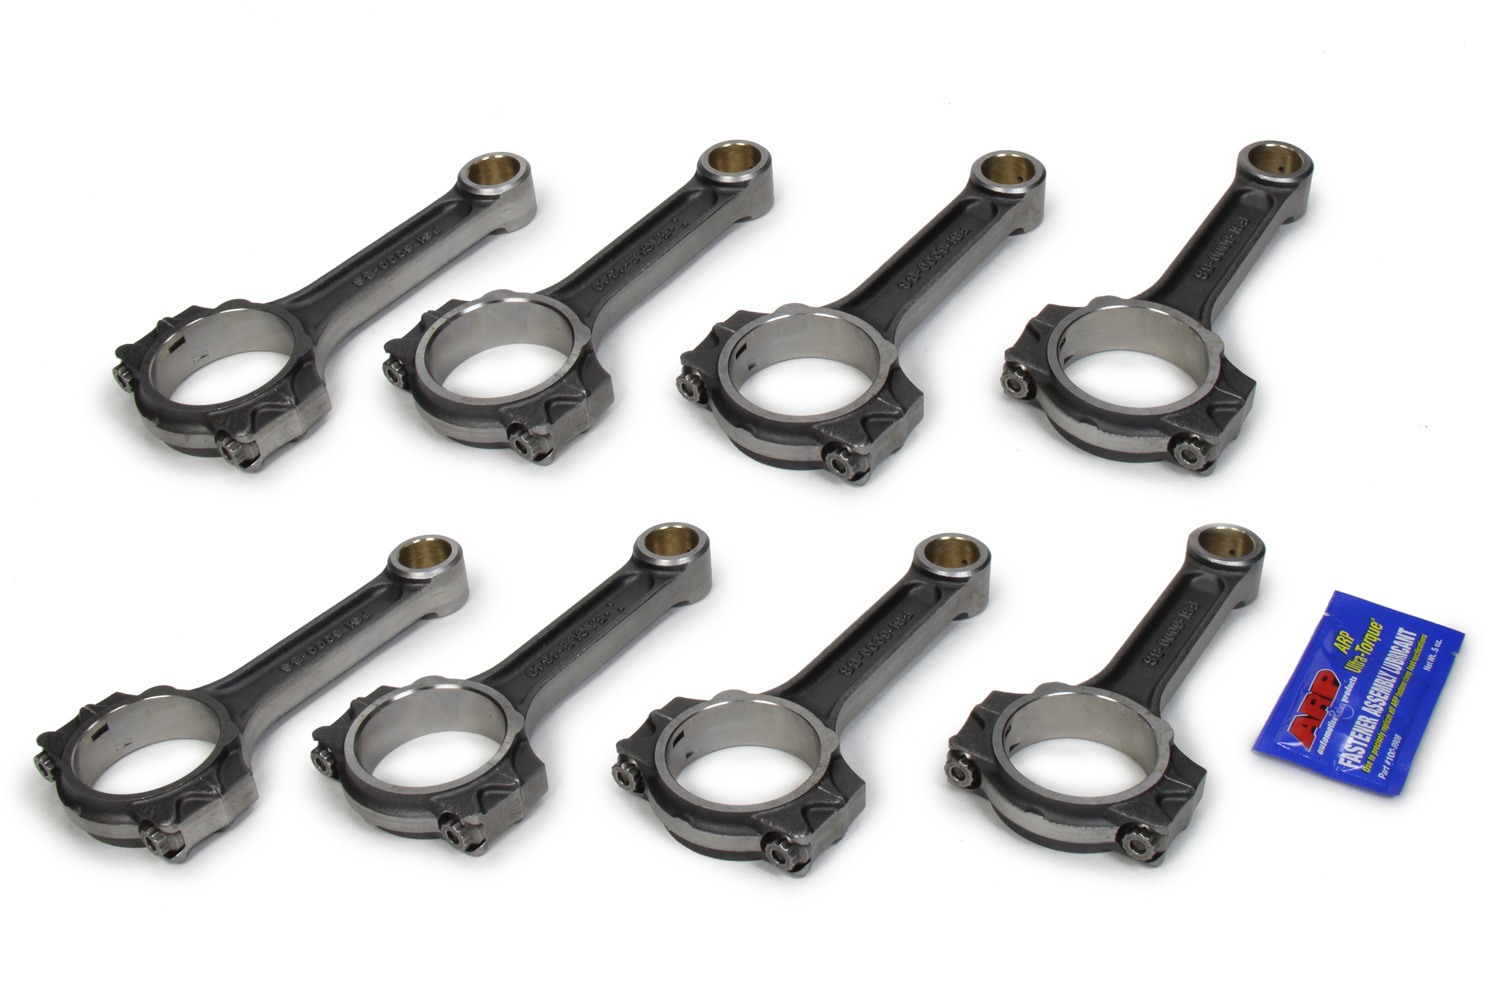 Eagle FSI6000B2000 Connecting Rod, I Beam, 6.000 in Long, Bushed, 7/16 in Cap Screws, ARP2000, Forged Steel, Small Block Chevy, Set of 8